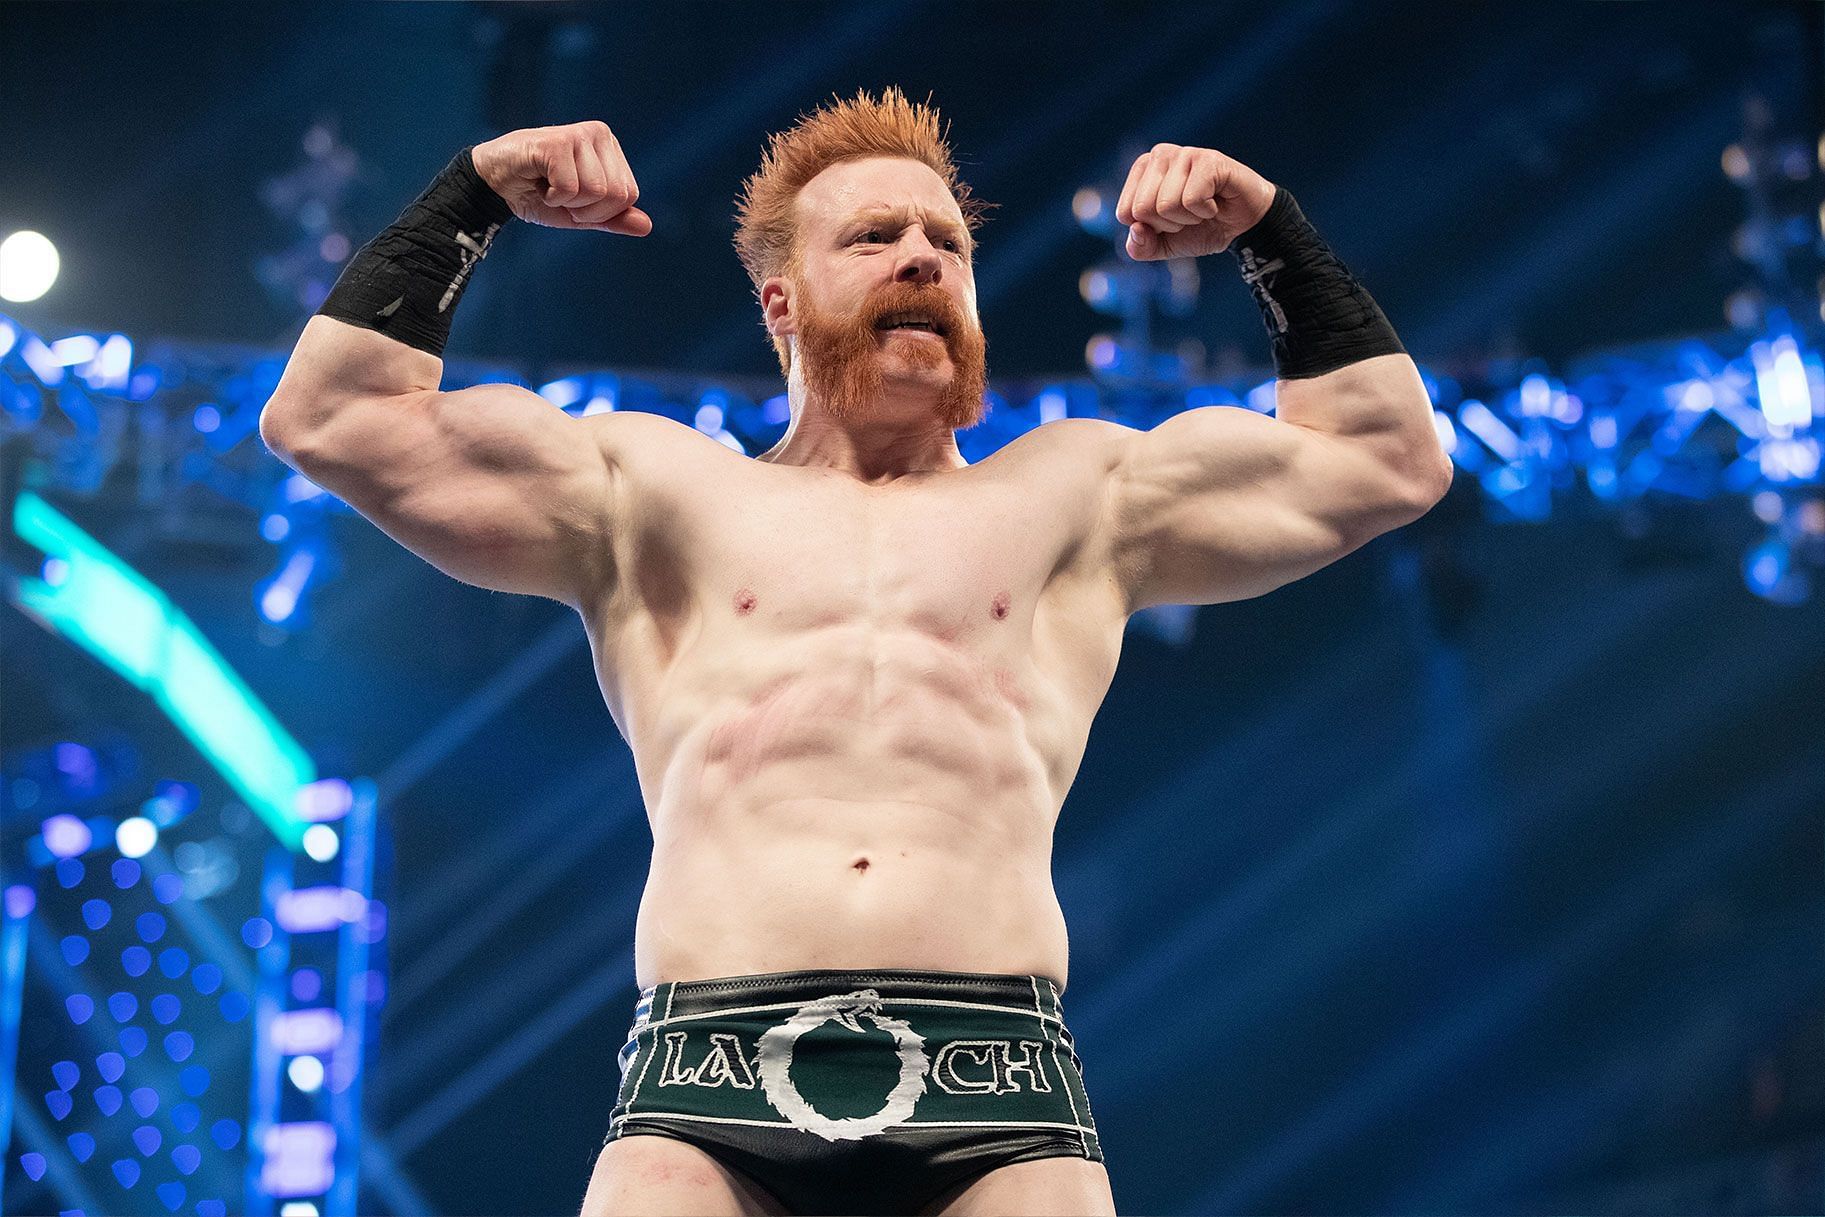 Sheamus is a featured star on SmackDown.